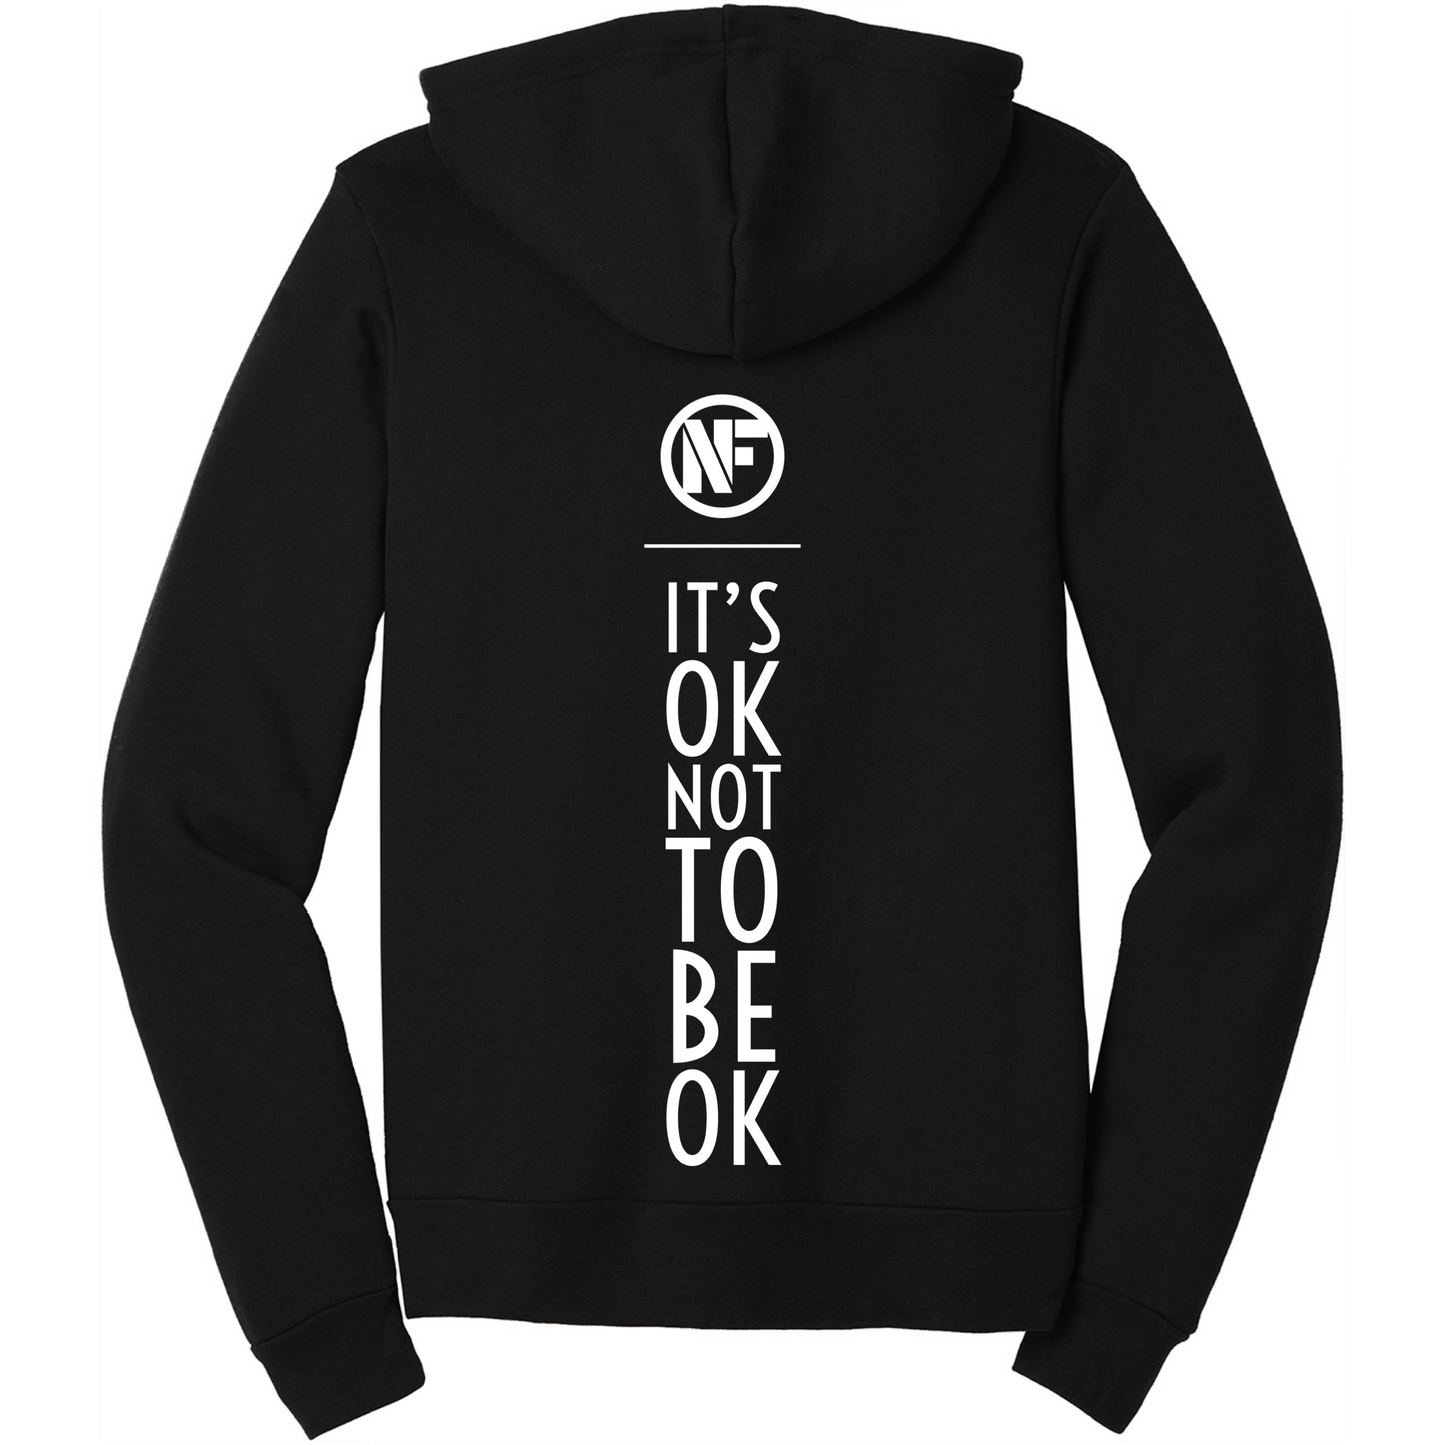 It's Ok Not to Be Ok Zip-Up Sweater